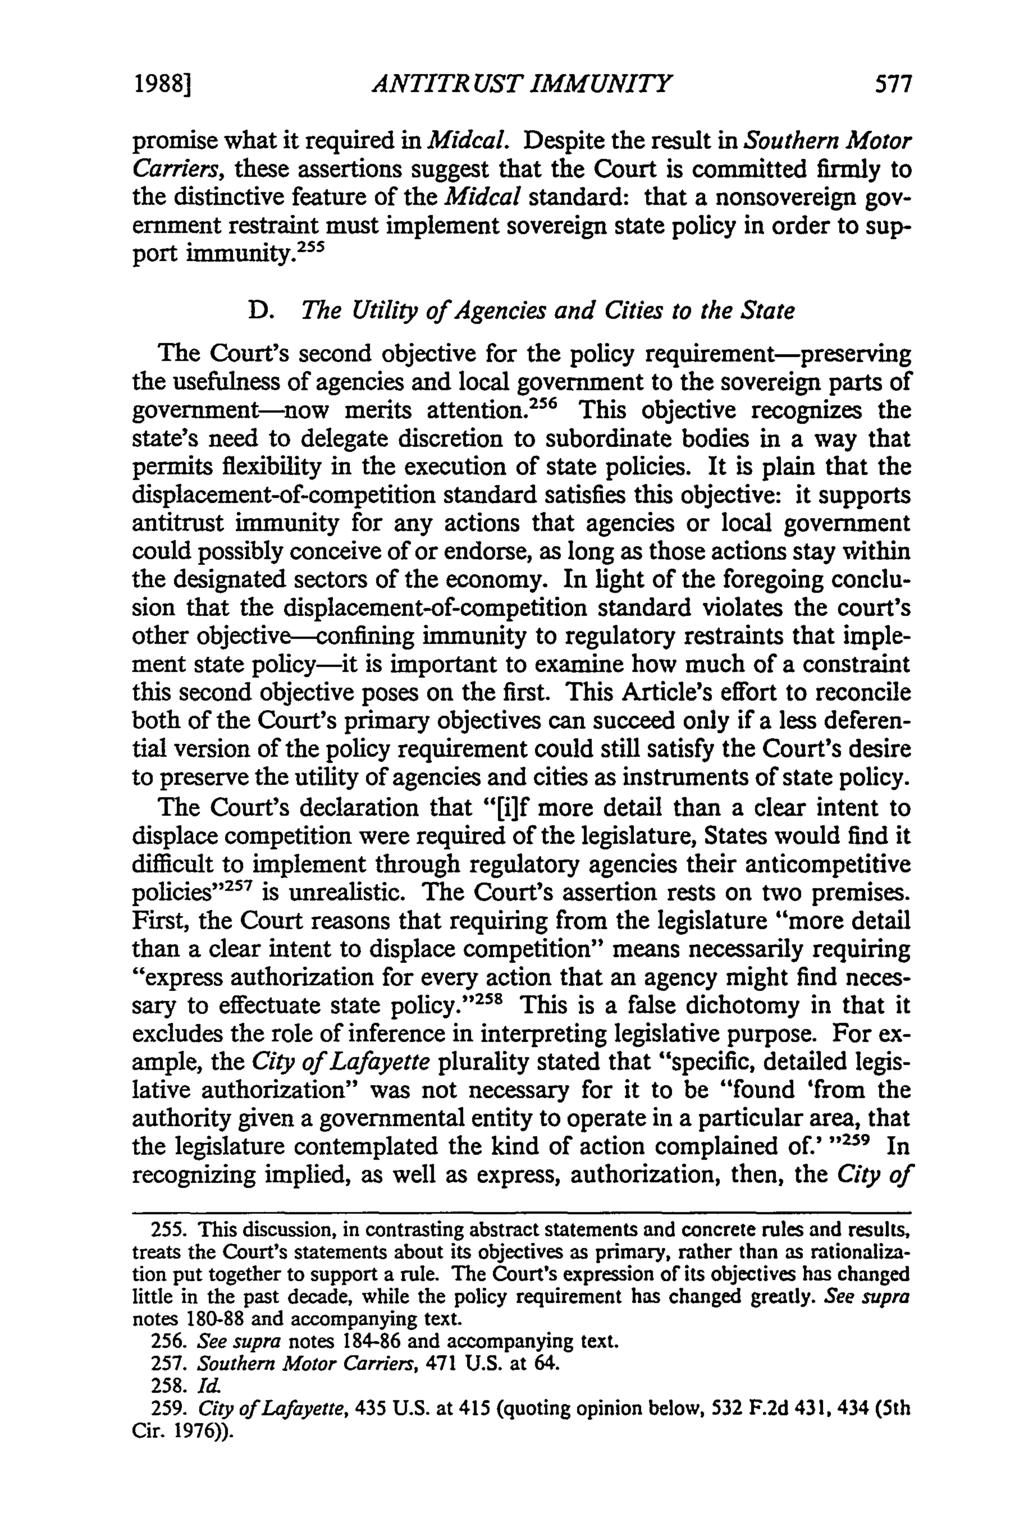 1988] ANTITR UST IMMUNITY promise what it required in Midcal.